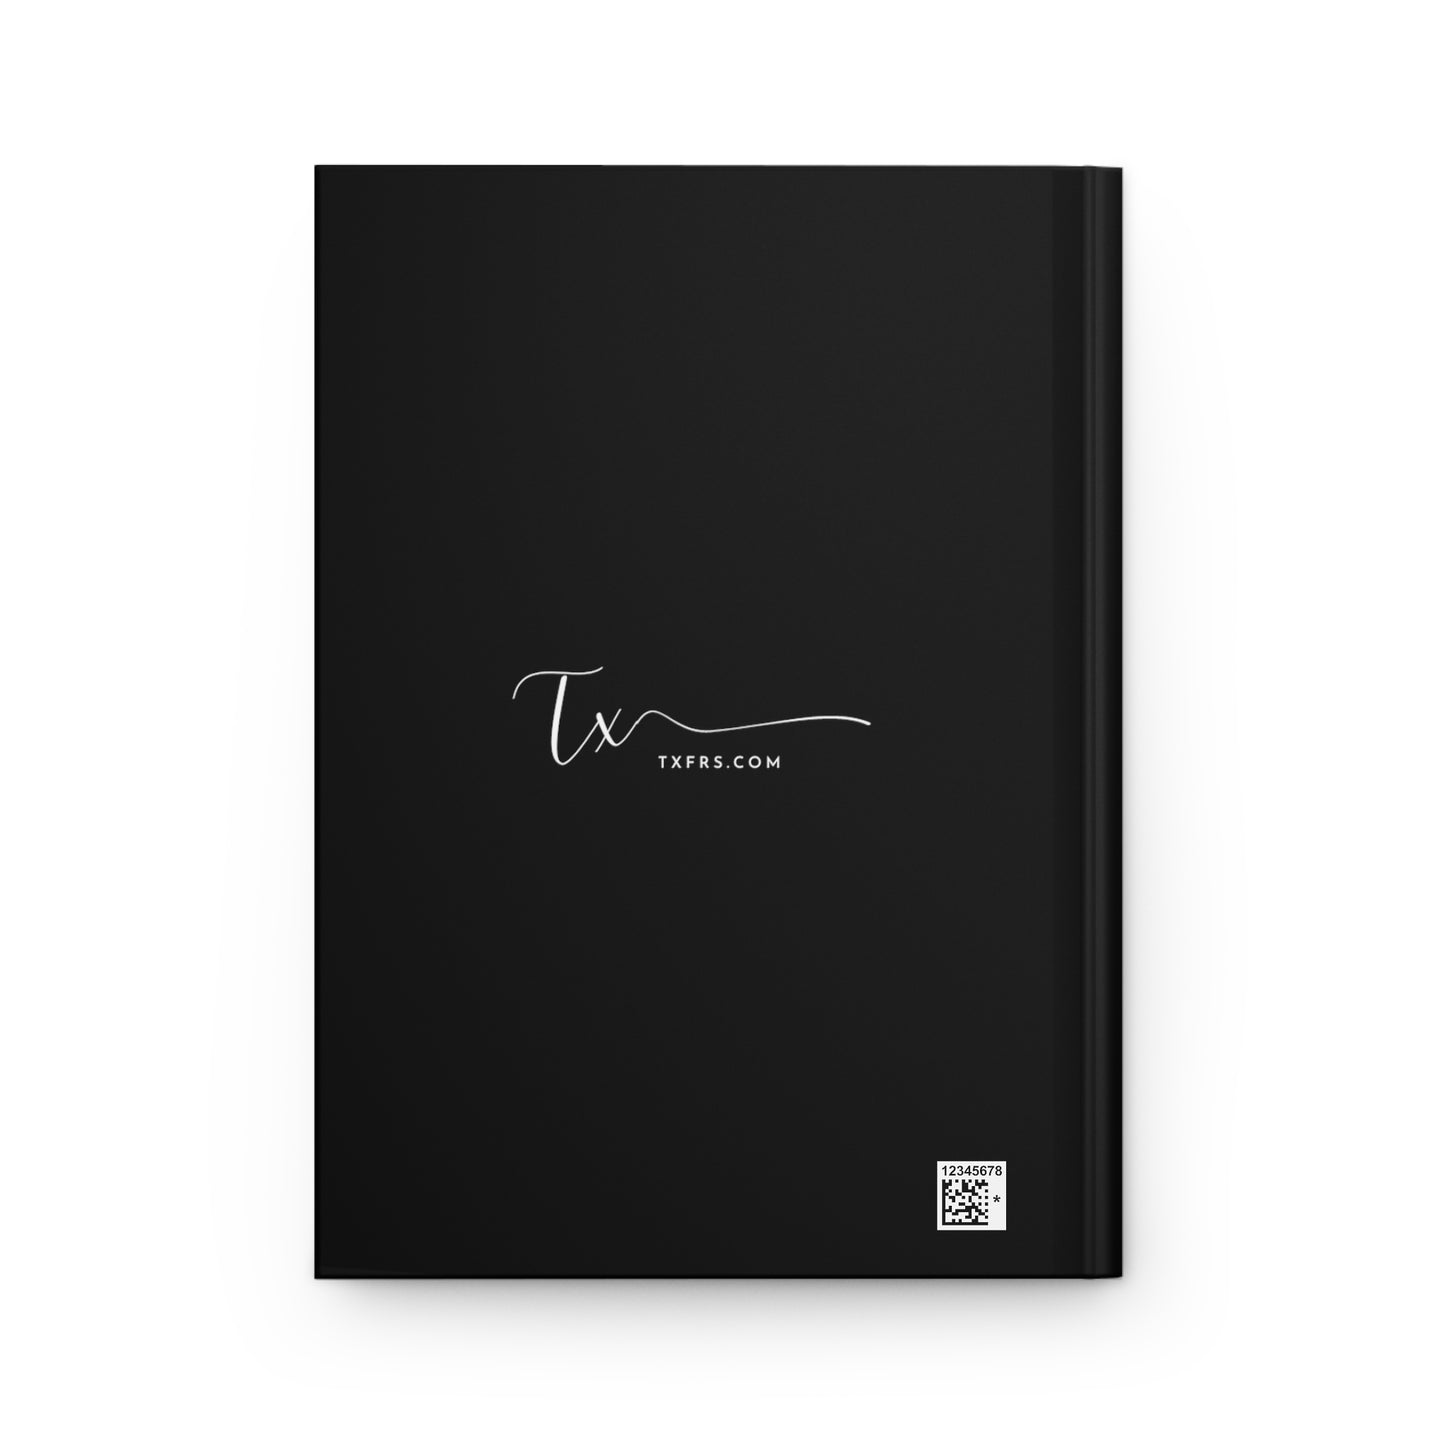 Black Hardcover Journal Matte - Motivational Quote:  The idea is not to live forever, but to create something that will. - Andy Warhol